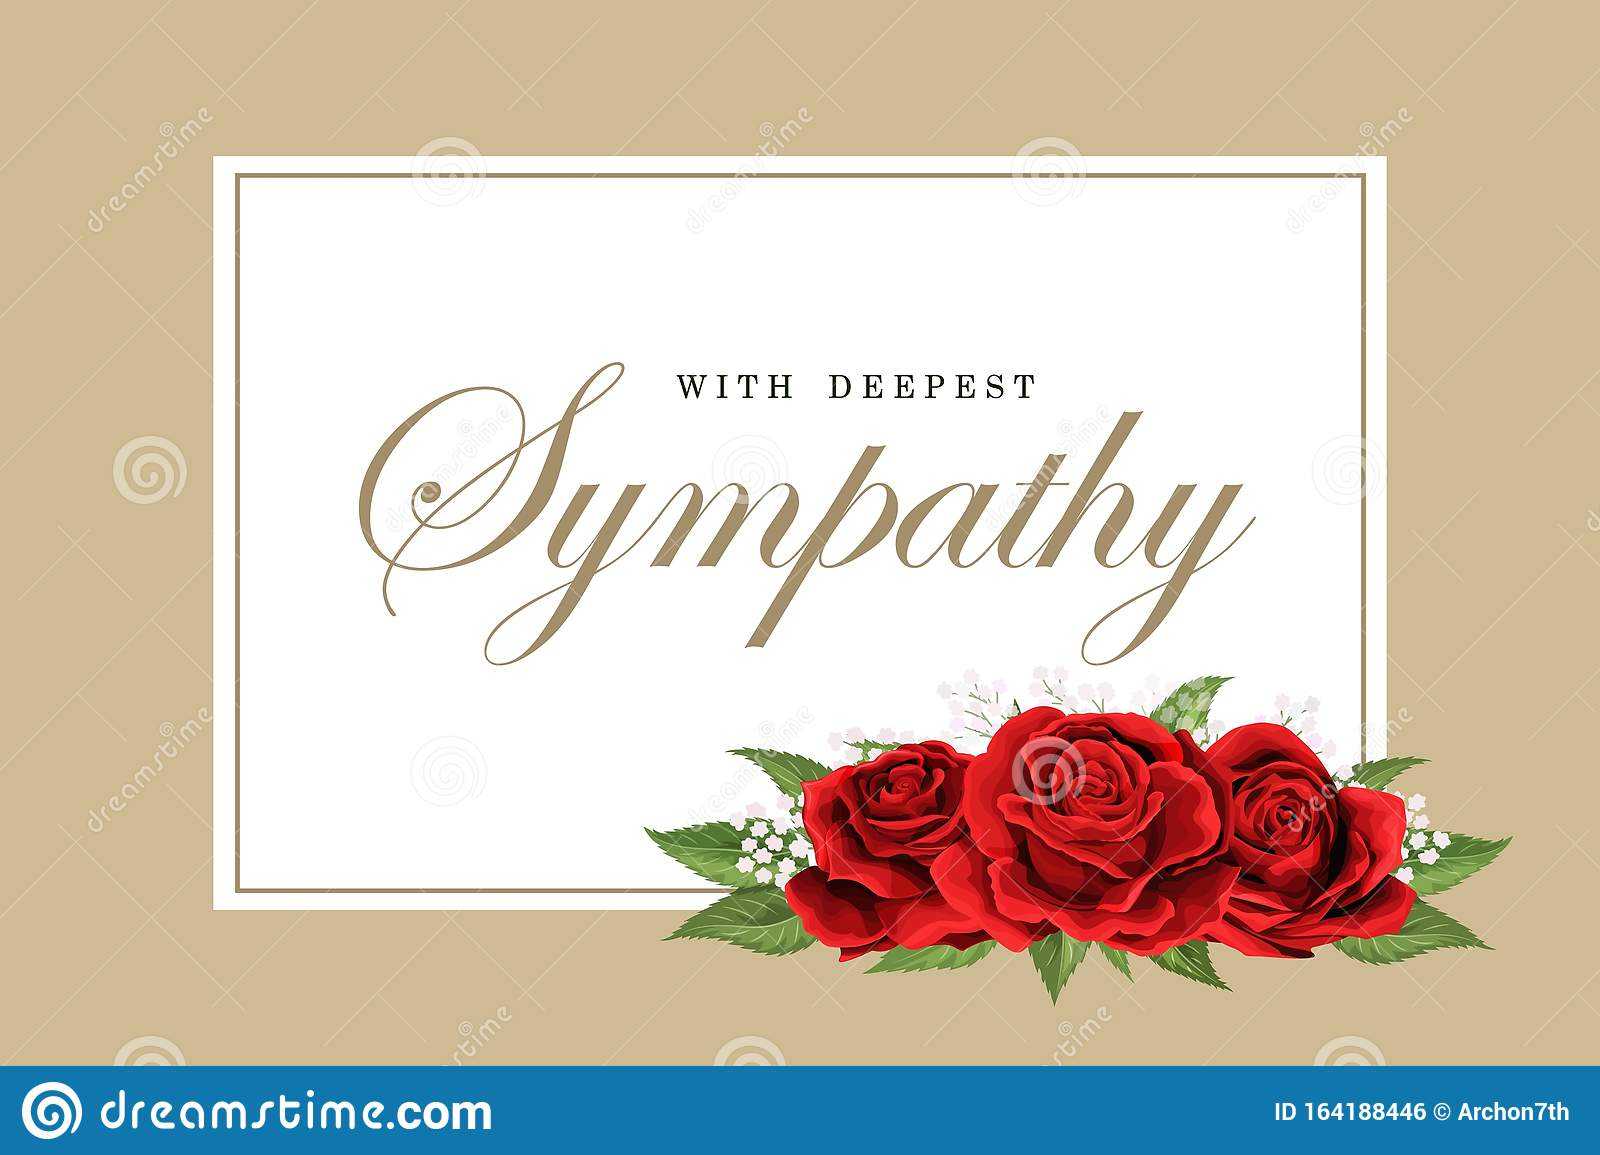 Condolences Sympathy Card Floral Red Roses Bouquet And Pertaining To Sorry For Your Loss Card Template